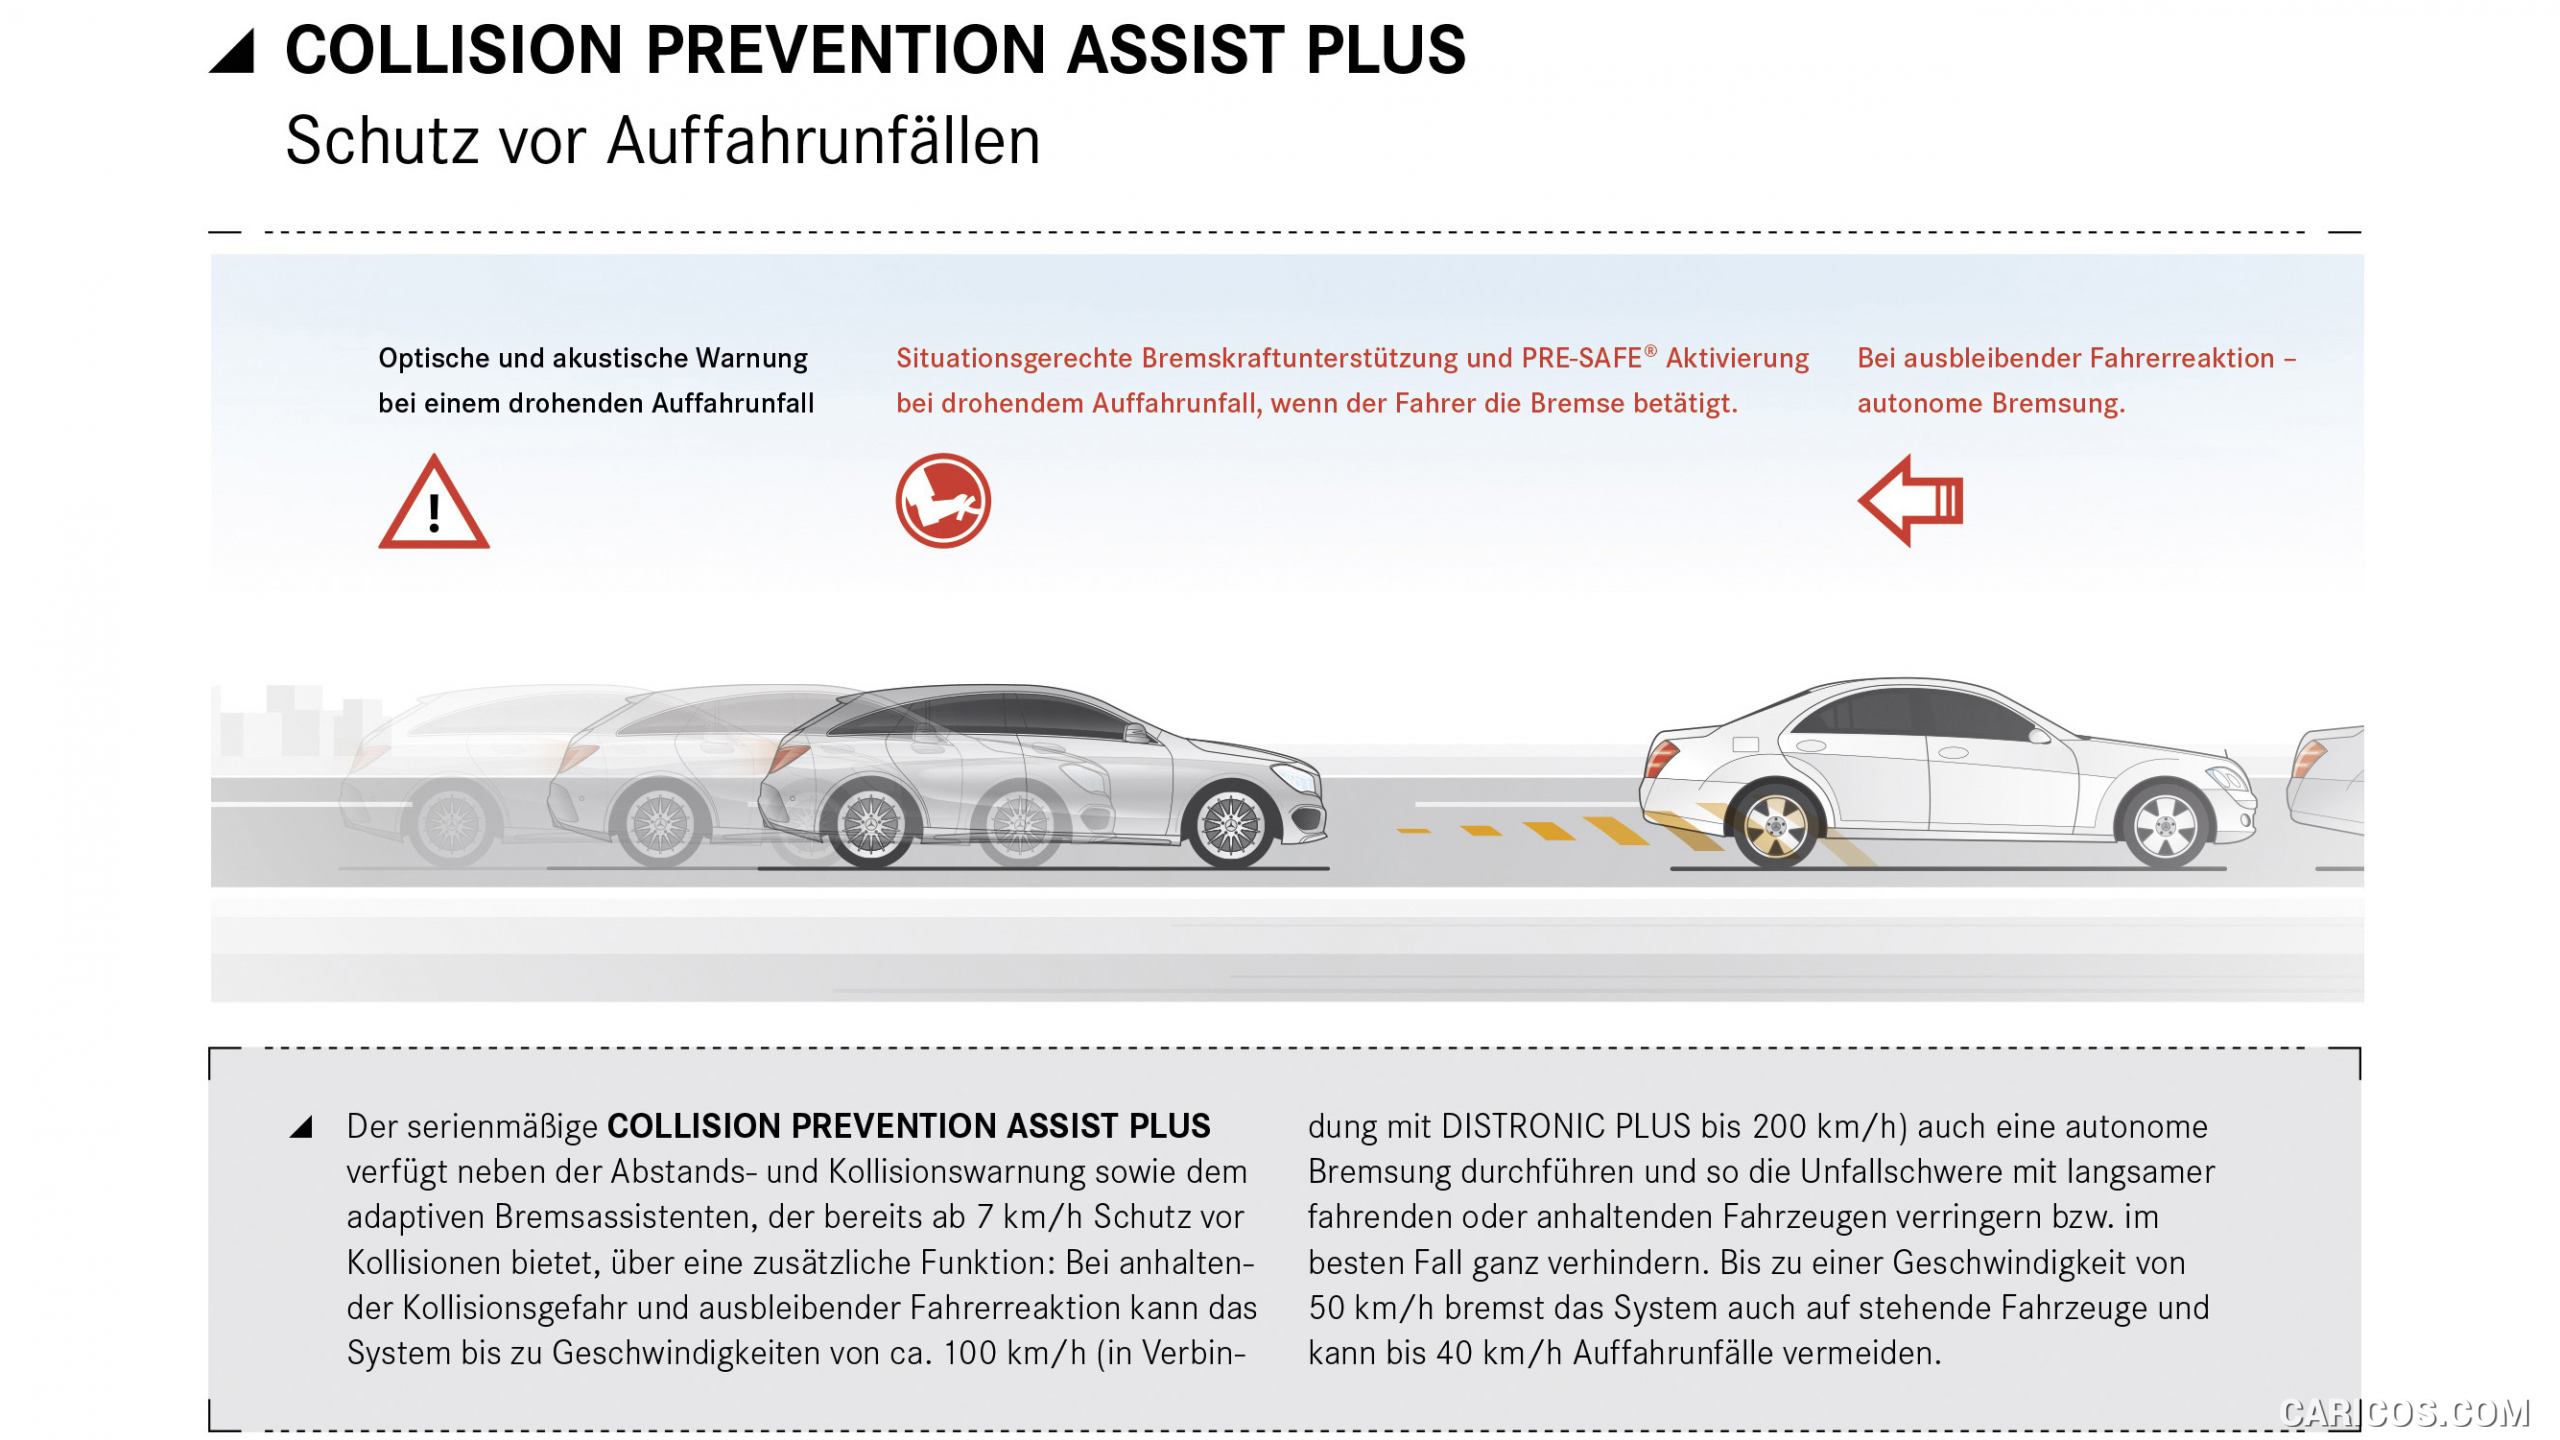 2015 Mercedes-Benz CLA-Class Shooting Brake - Collision Prevention Assist Plus - , #57 of 96